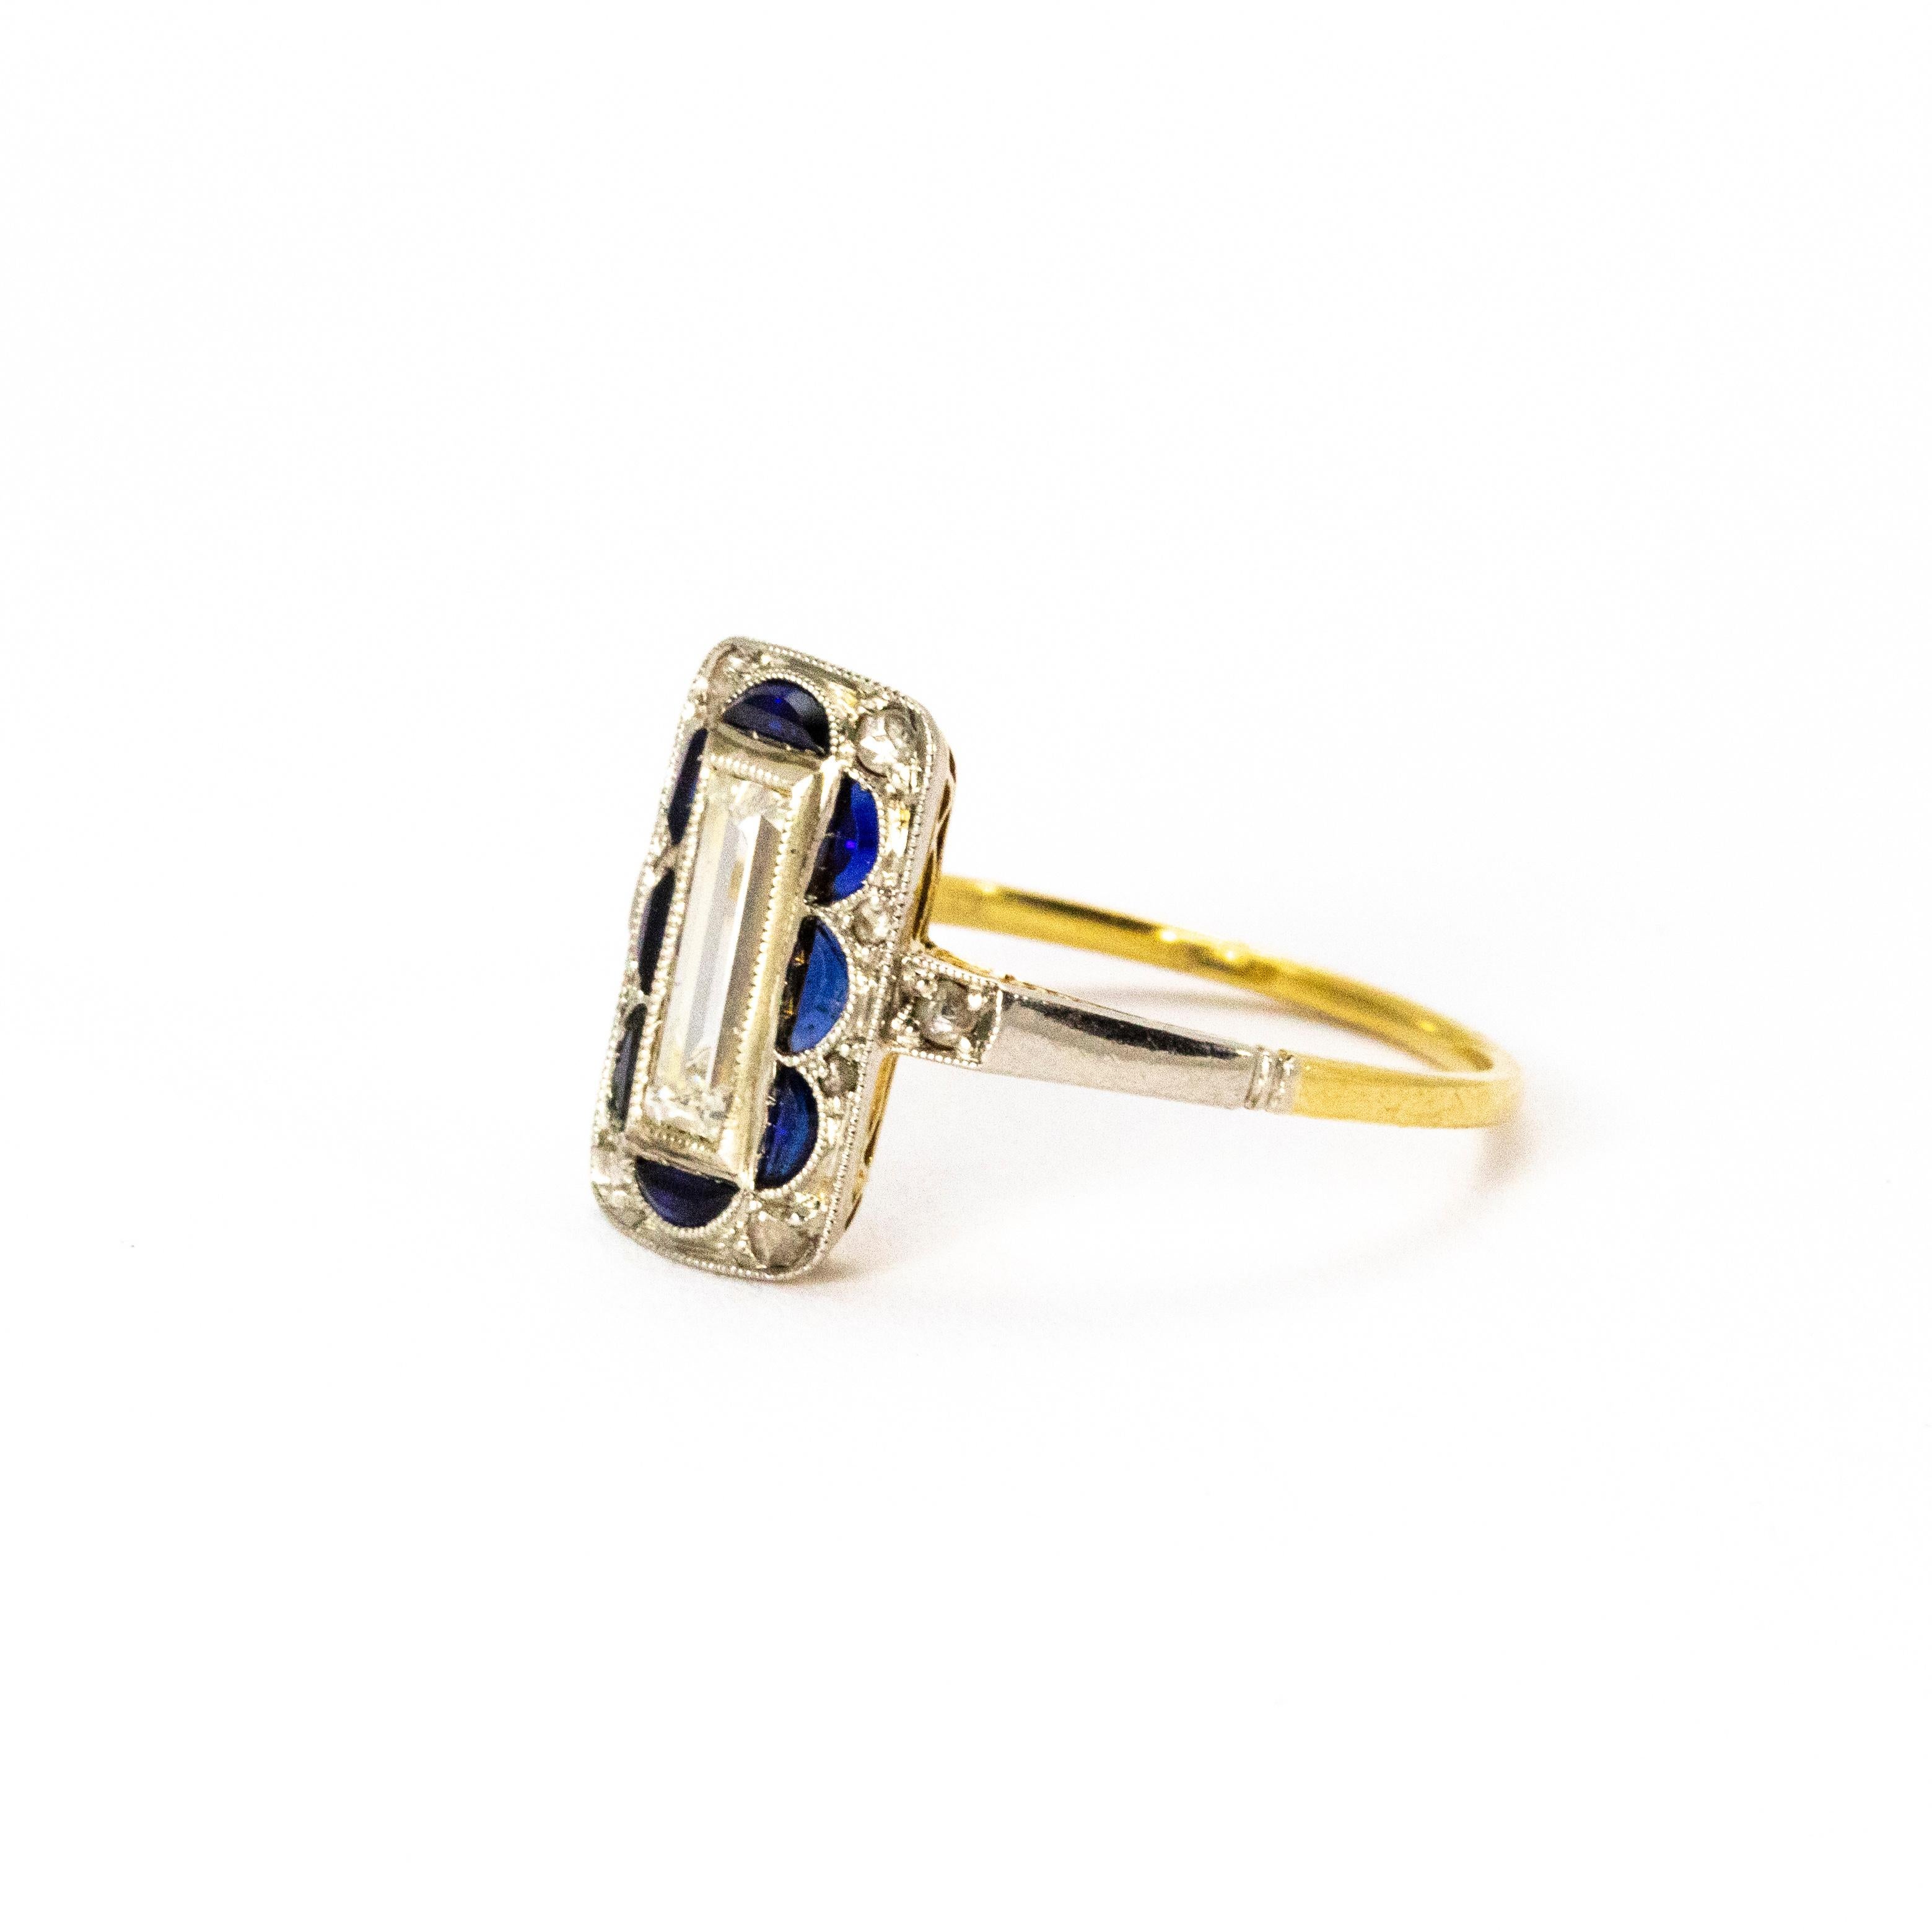 A brilliant Art Deco panel ring. Set with a beautiful white emerald cut diamond weighing 75 points surrounded by eight semicircular blue sapphires. Between the curves of the sapphires and onto the shoulders sit a further ten diamonds. Modelled on